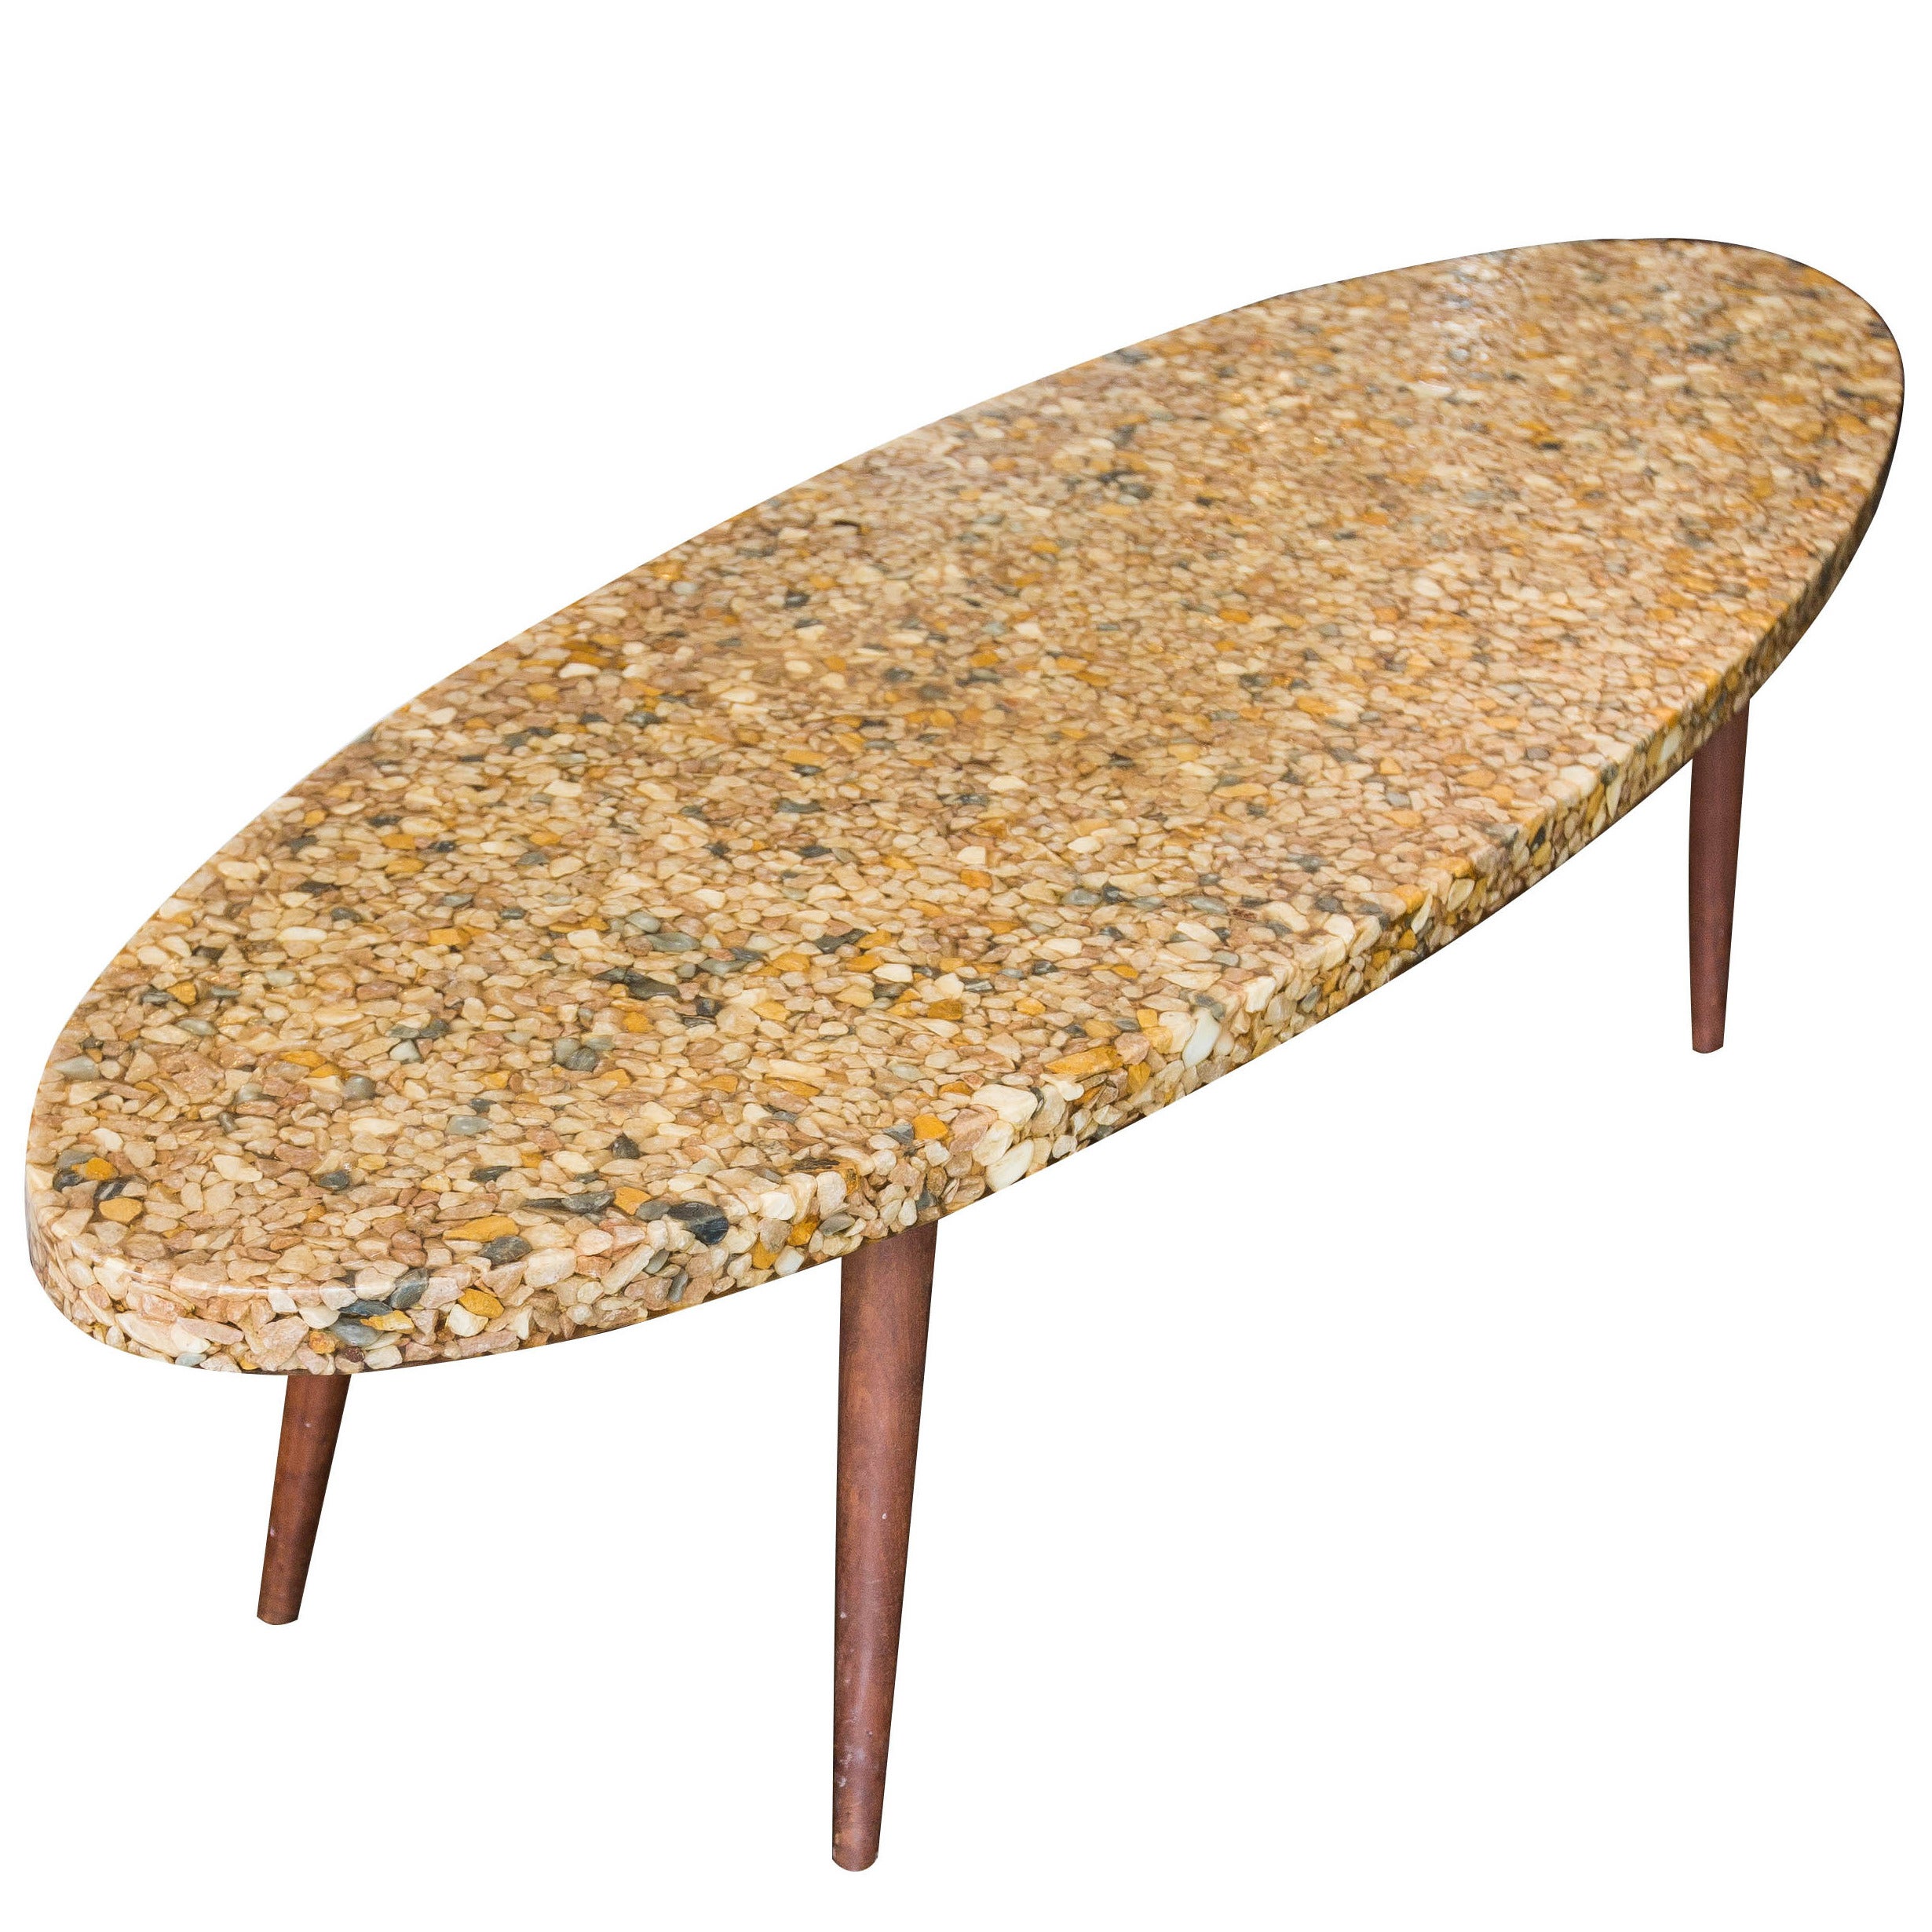 Vintage Surfboard Coffee Table Made of River Rock in Resin